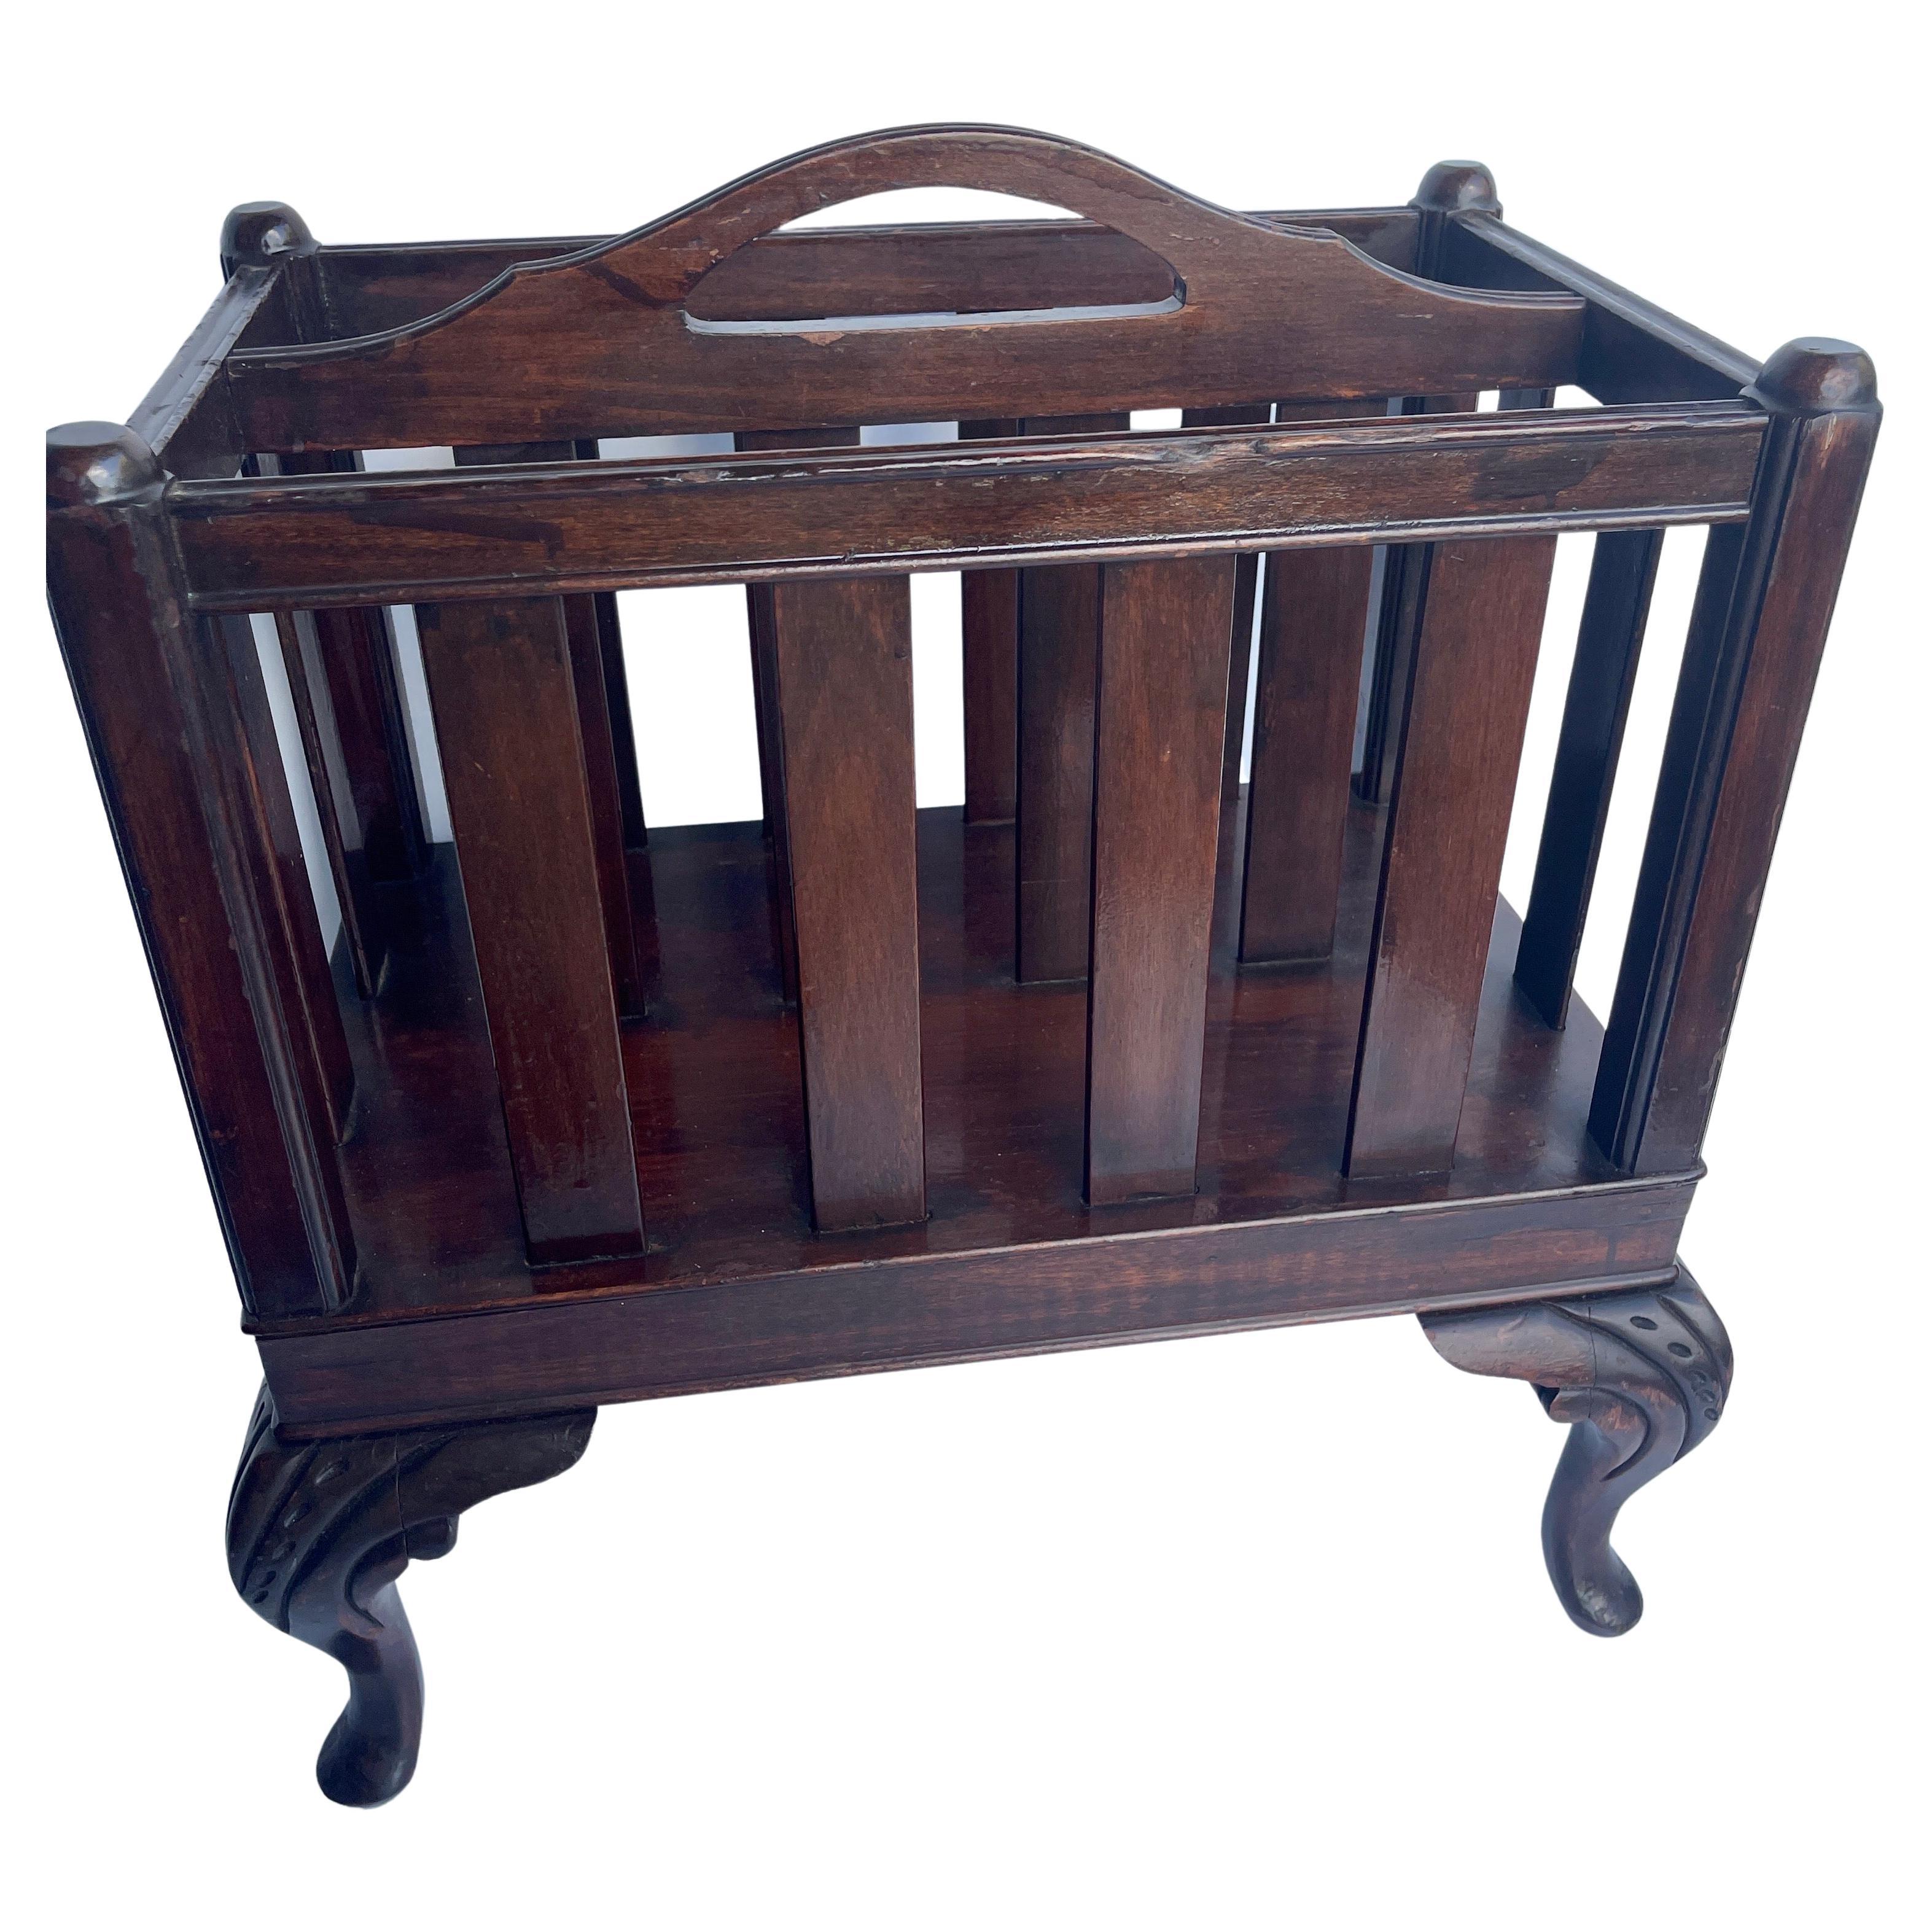 Early 20th Century English Regency style mahogany rack with two compartments for magazines or records.